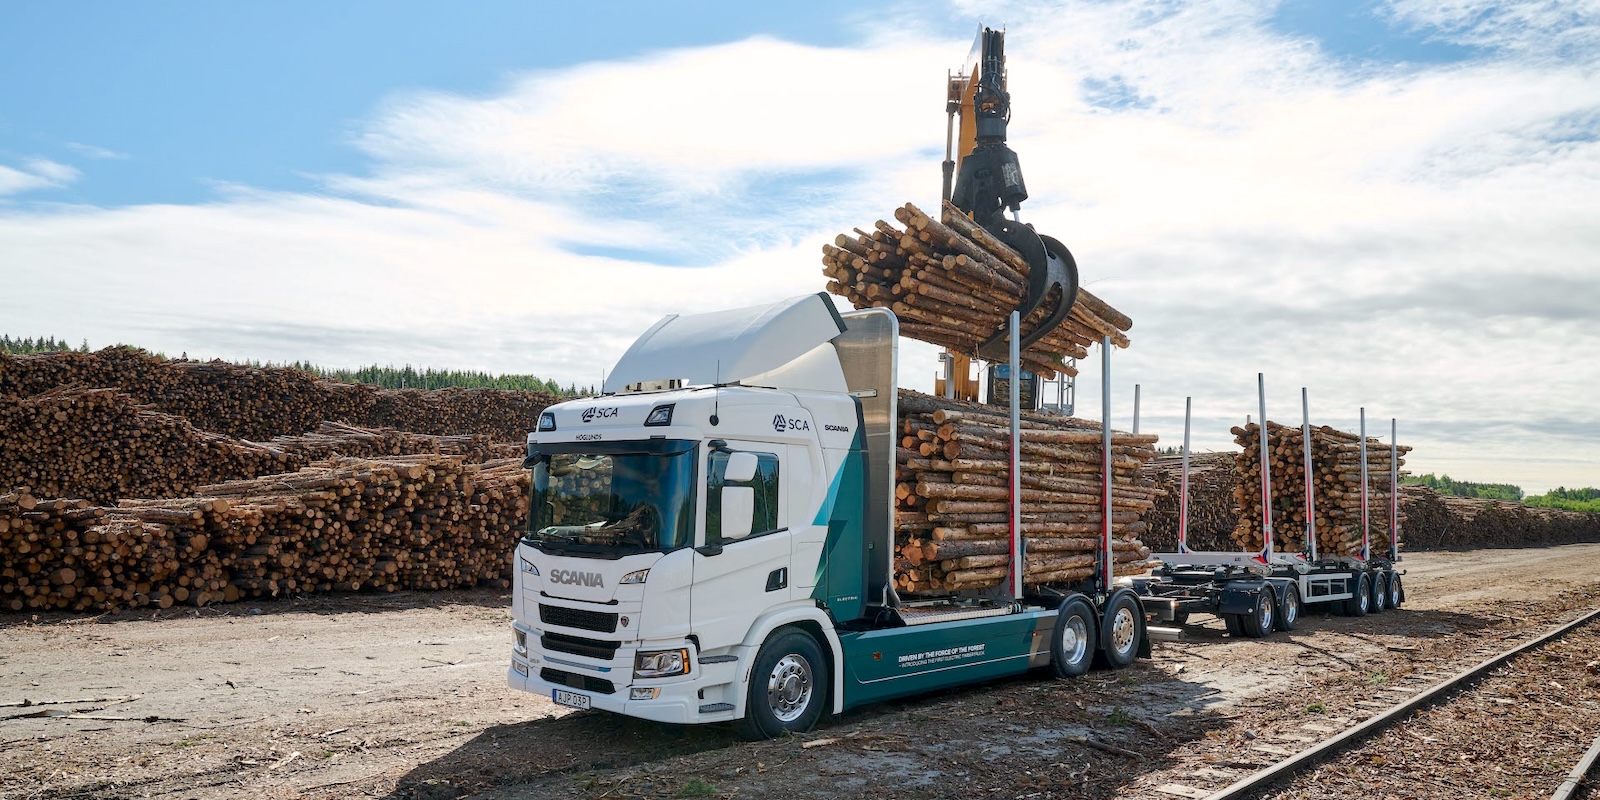 SCA and Scania are working together to develop electric timber truck for the forestry. The first vehicle came 2022 and transports timber between SCA’s terminal in Gimonäs and the paper mill in Obbola and the second truck will arrive in fall 2024 and be driven in the forest. For SCA, thi sis important steps towards sustainable transport solution and a fossil-free society.